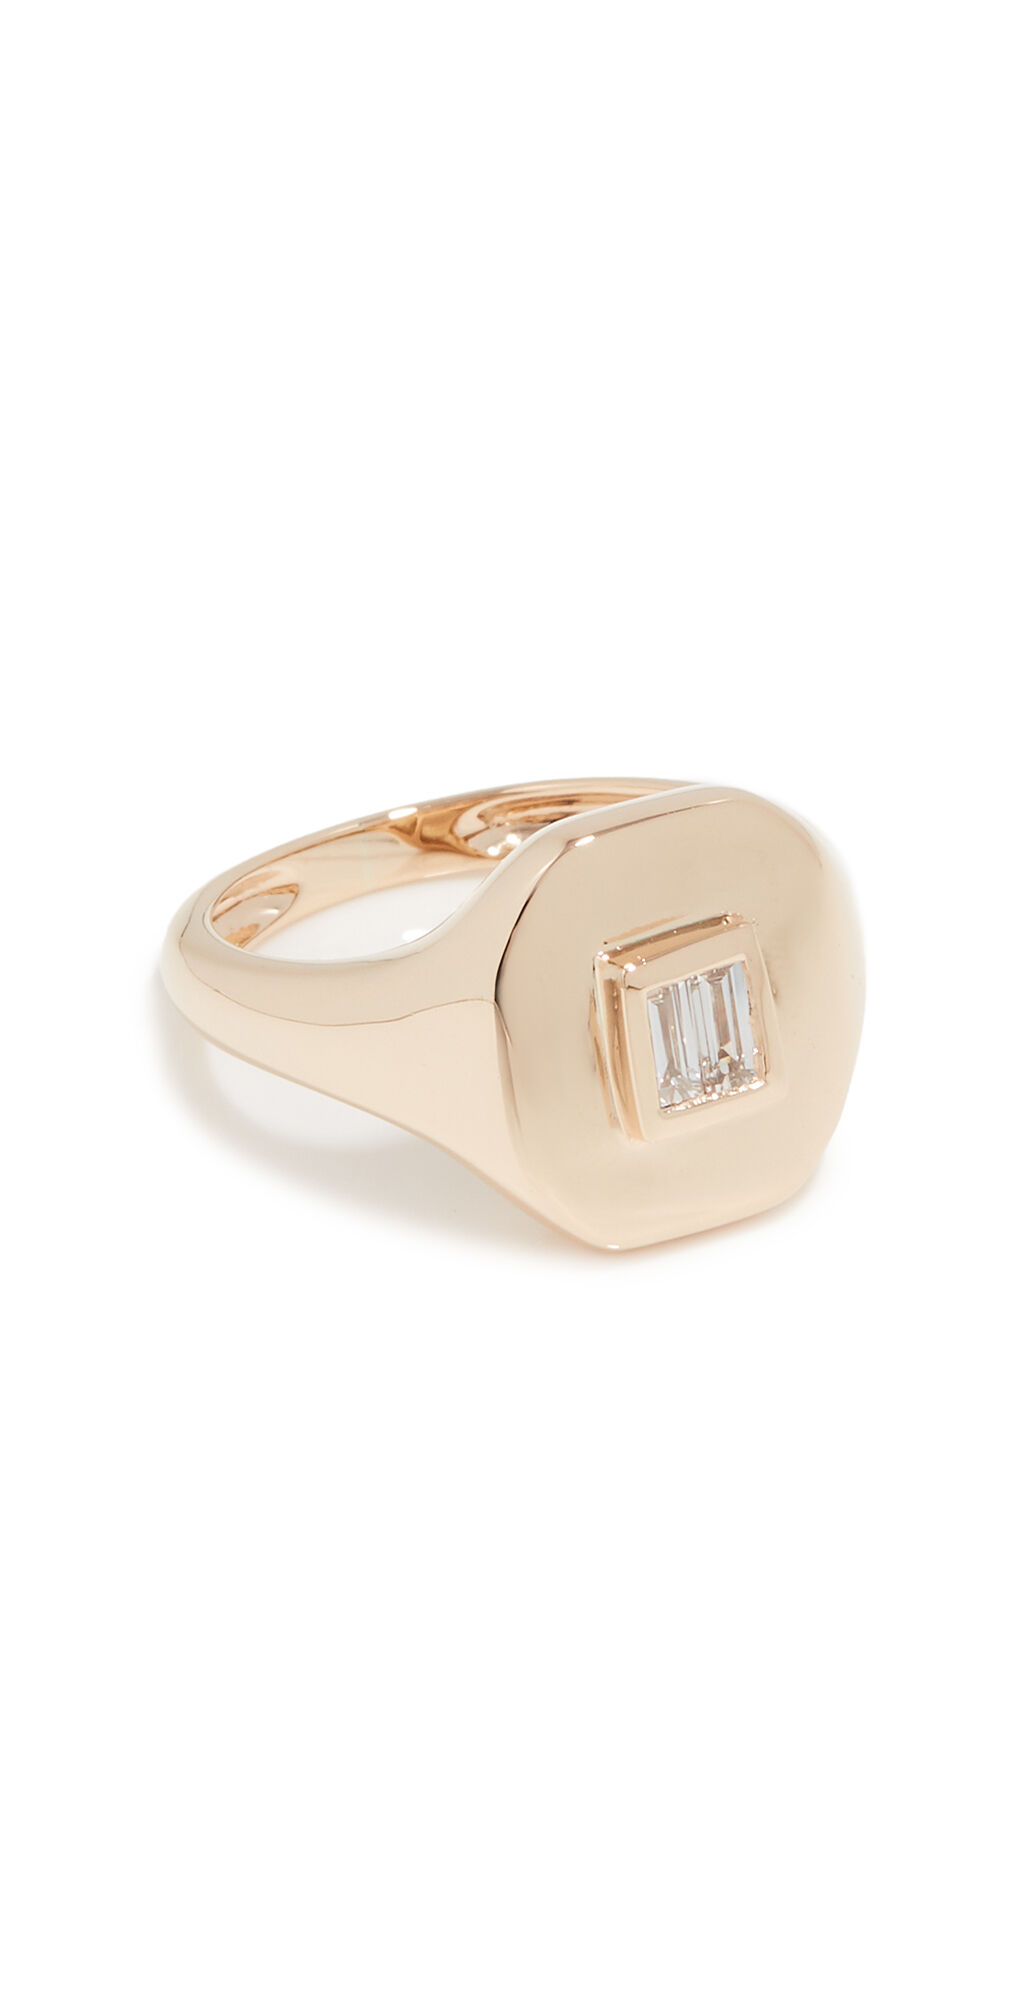 SHAY 18k Essential Diamond Pinky Ring Gold/White Diamond 3.5  Gold/White Diamond  size:3.5